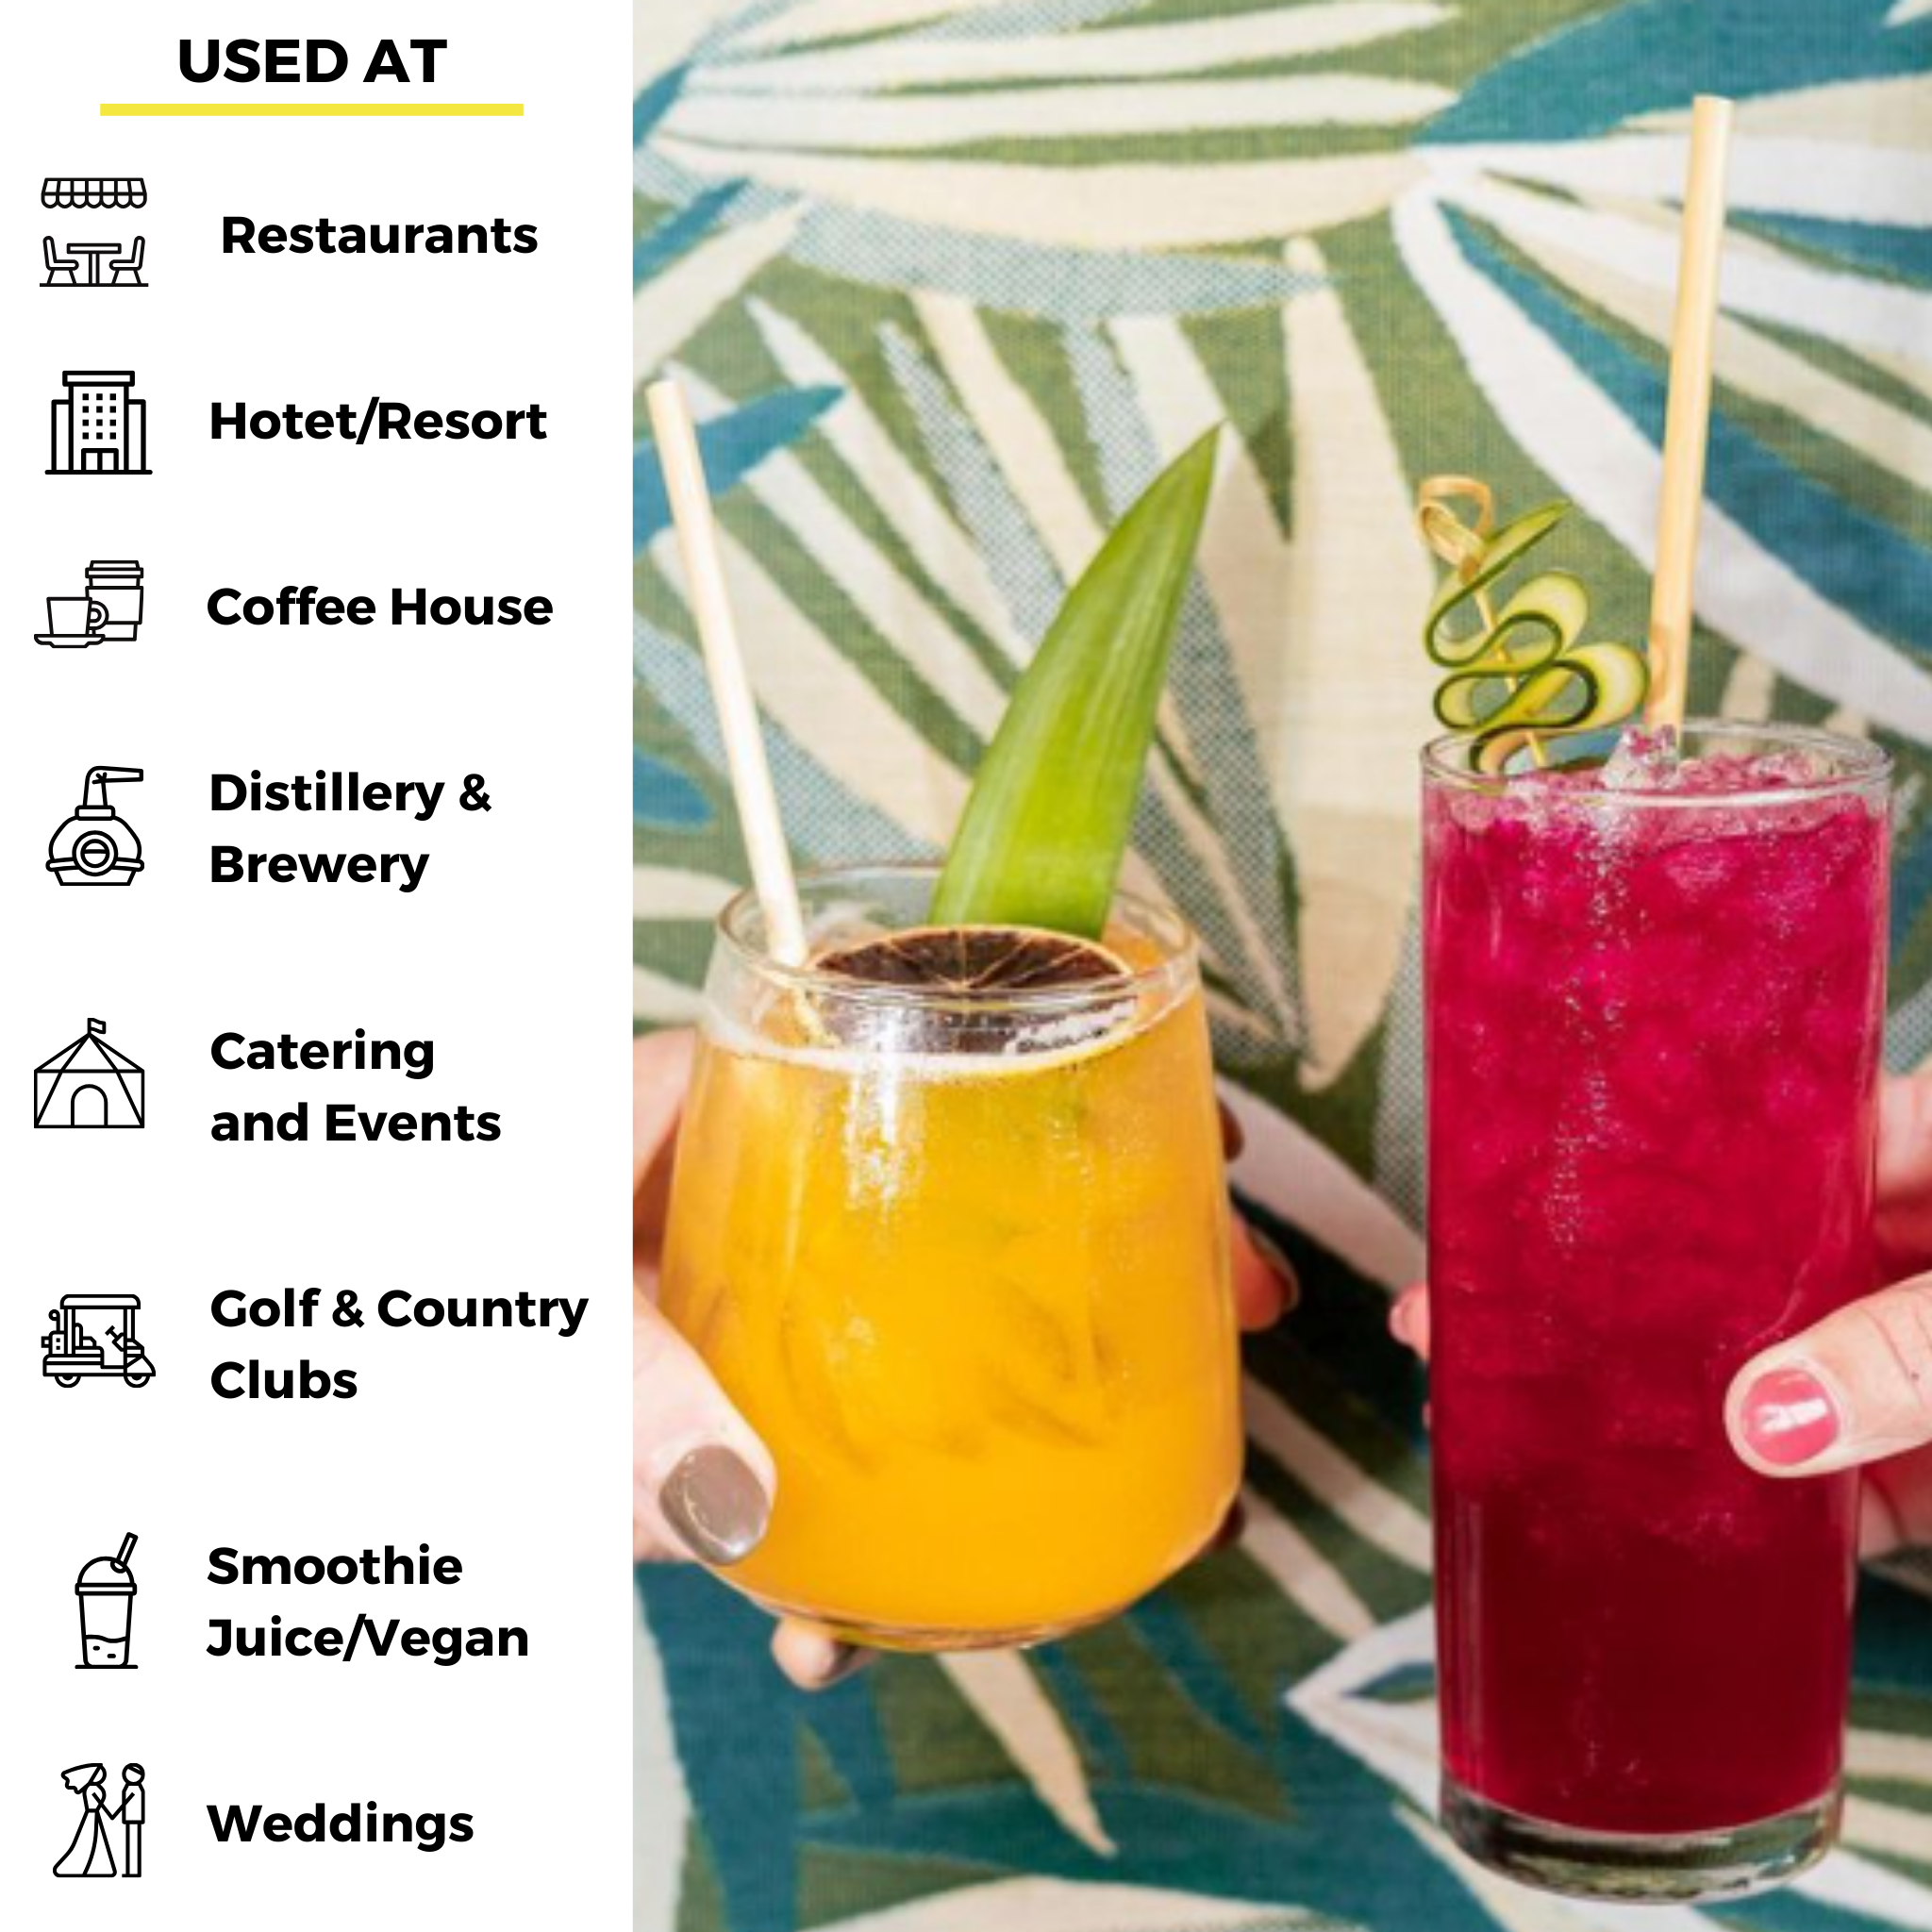 Two cocktails are held side by side, one garnished with a pineapple leaf and the other with a cucumber spiral. Both feature skinny reed straws. On the left side, a list outlines where these straws are commonly used, including restaurants, hotels/resorts, coffee houses, distilleries and breweries, catering and events, golf and country clubs, smoothie/vegan juice bars, and weddings.